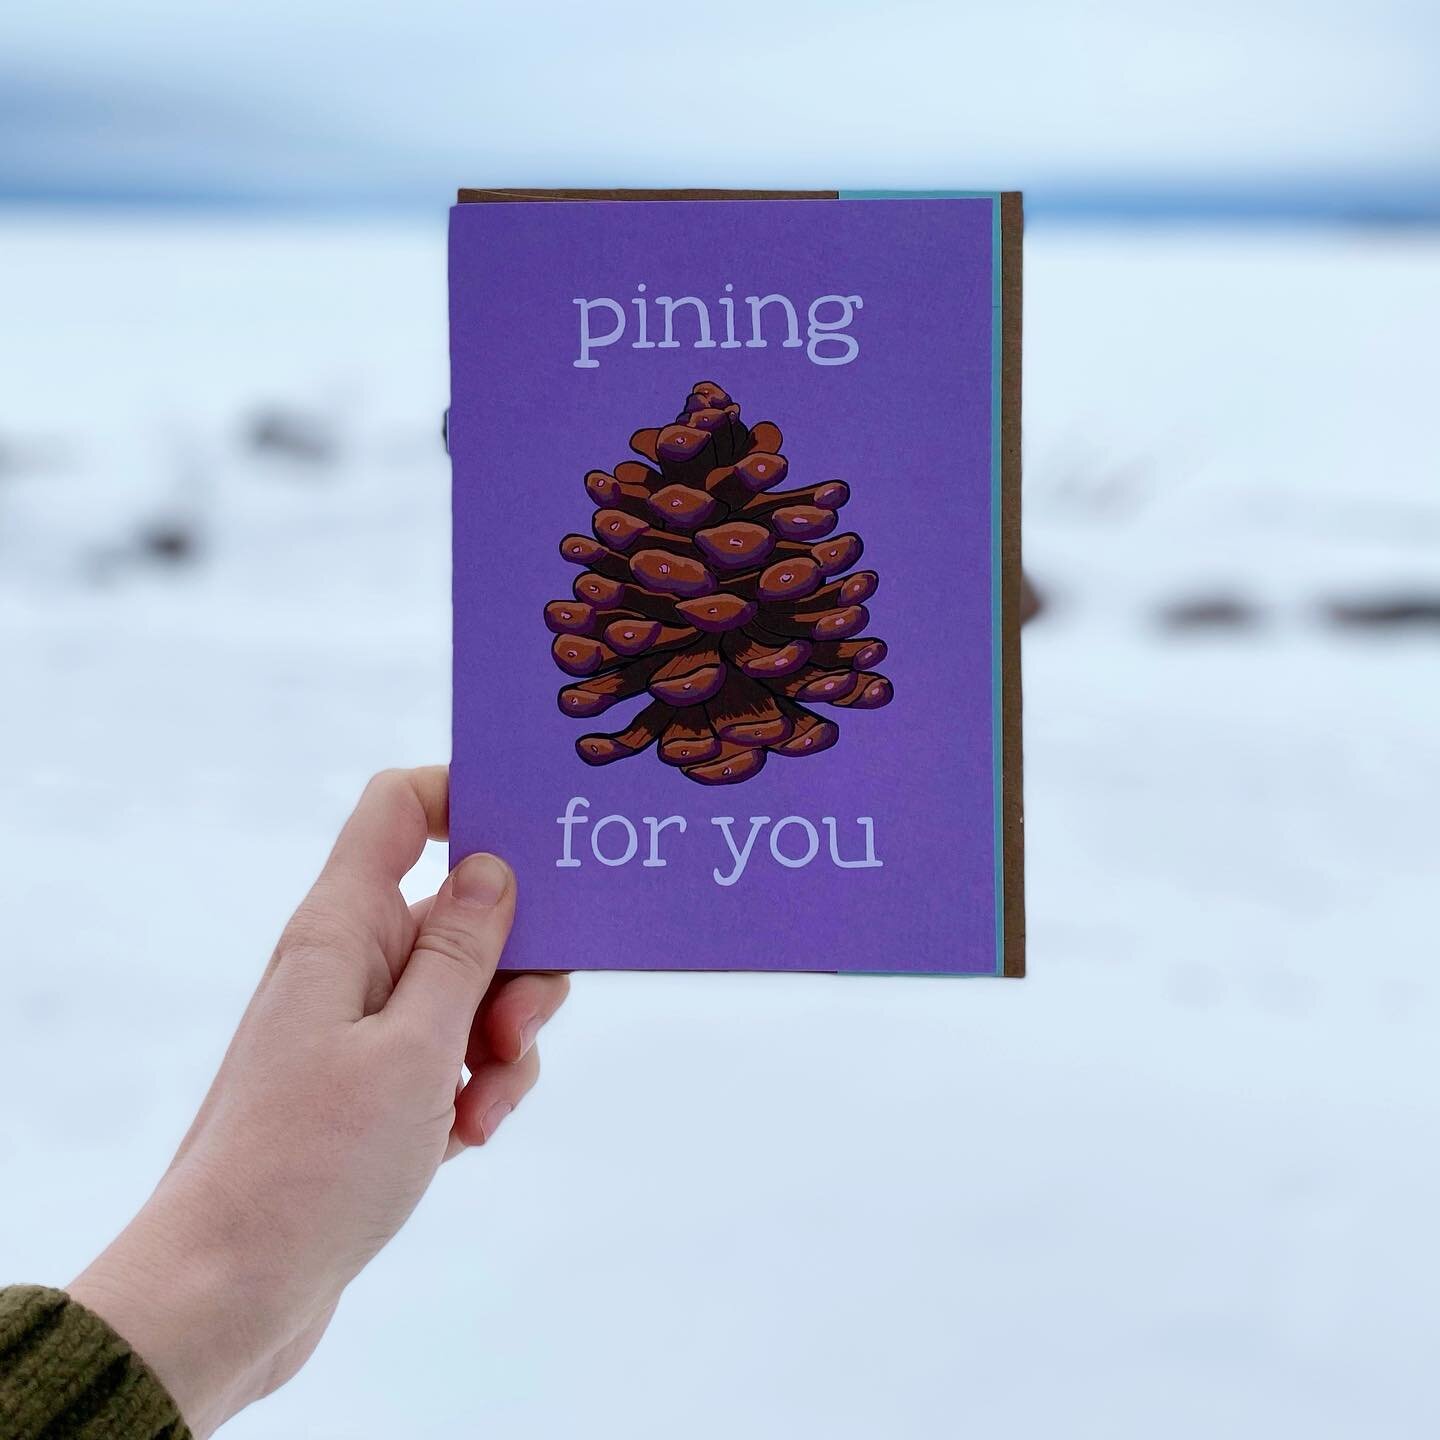 Thinking of sending someone a love note? Check out some of the awesome cards from @compasspaperco&mdash;hand designed by Annie in Northern Michigan, printed using vegetable based ink, and sure to please any outdoor lover in your life! #spicy #card #v